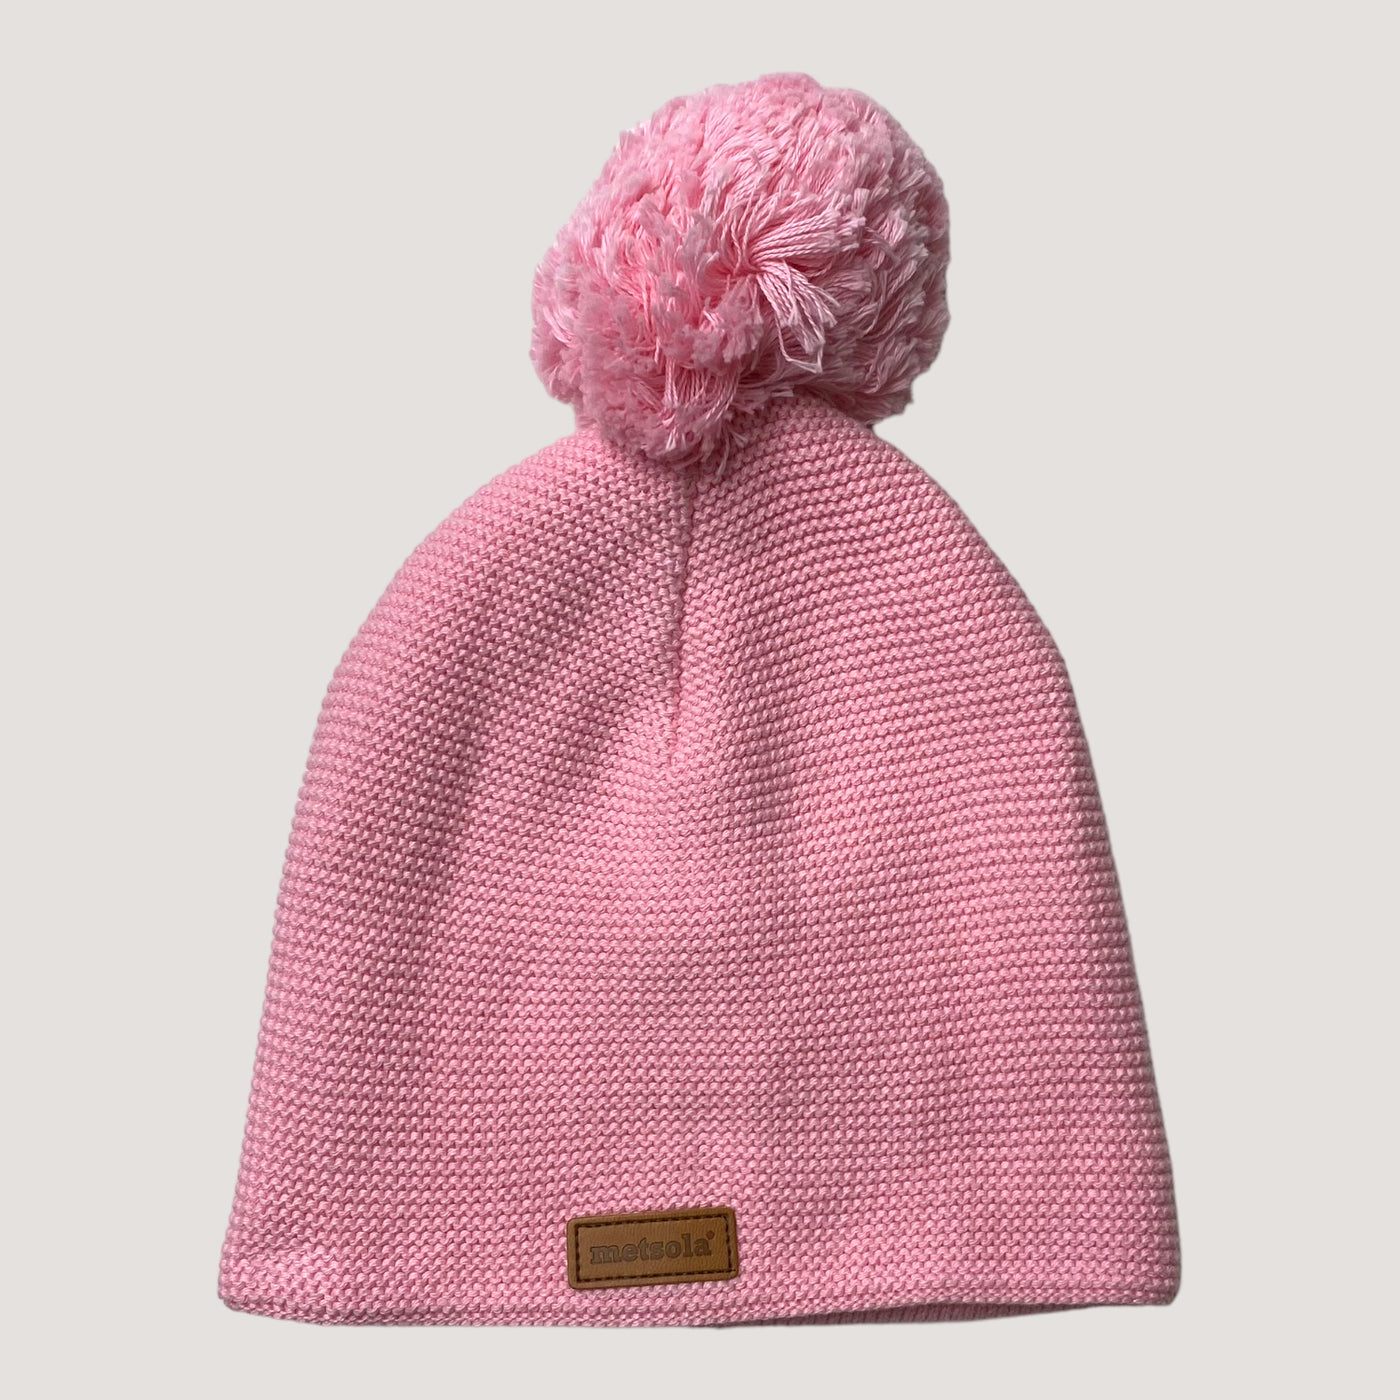 Metsola knitted cotton beanie, pink | 3-5y